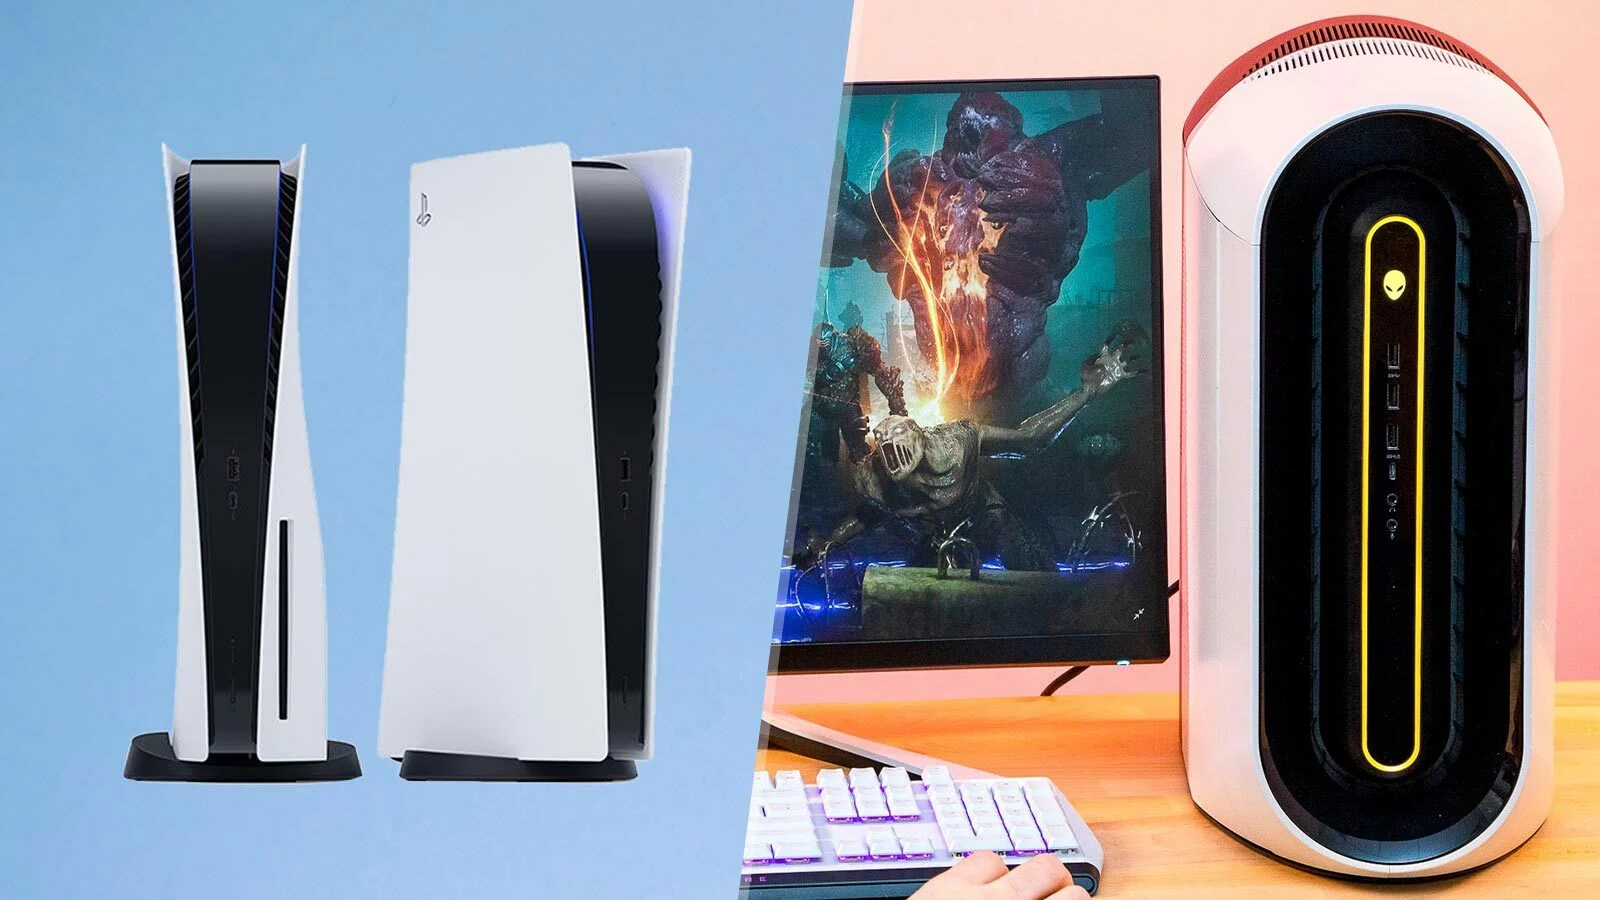 What PC can you build for the price of PS5 ? Is PS5 better than PC gaming?